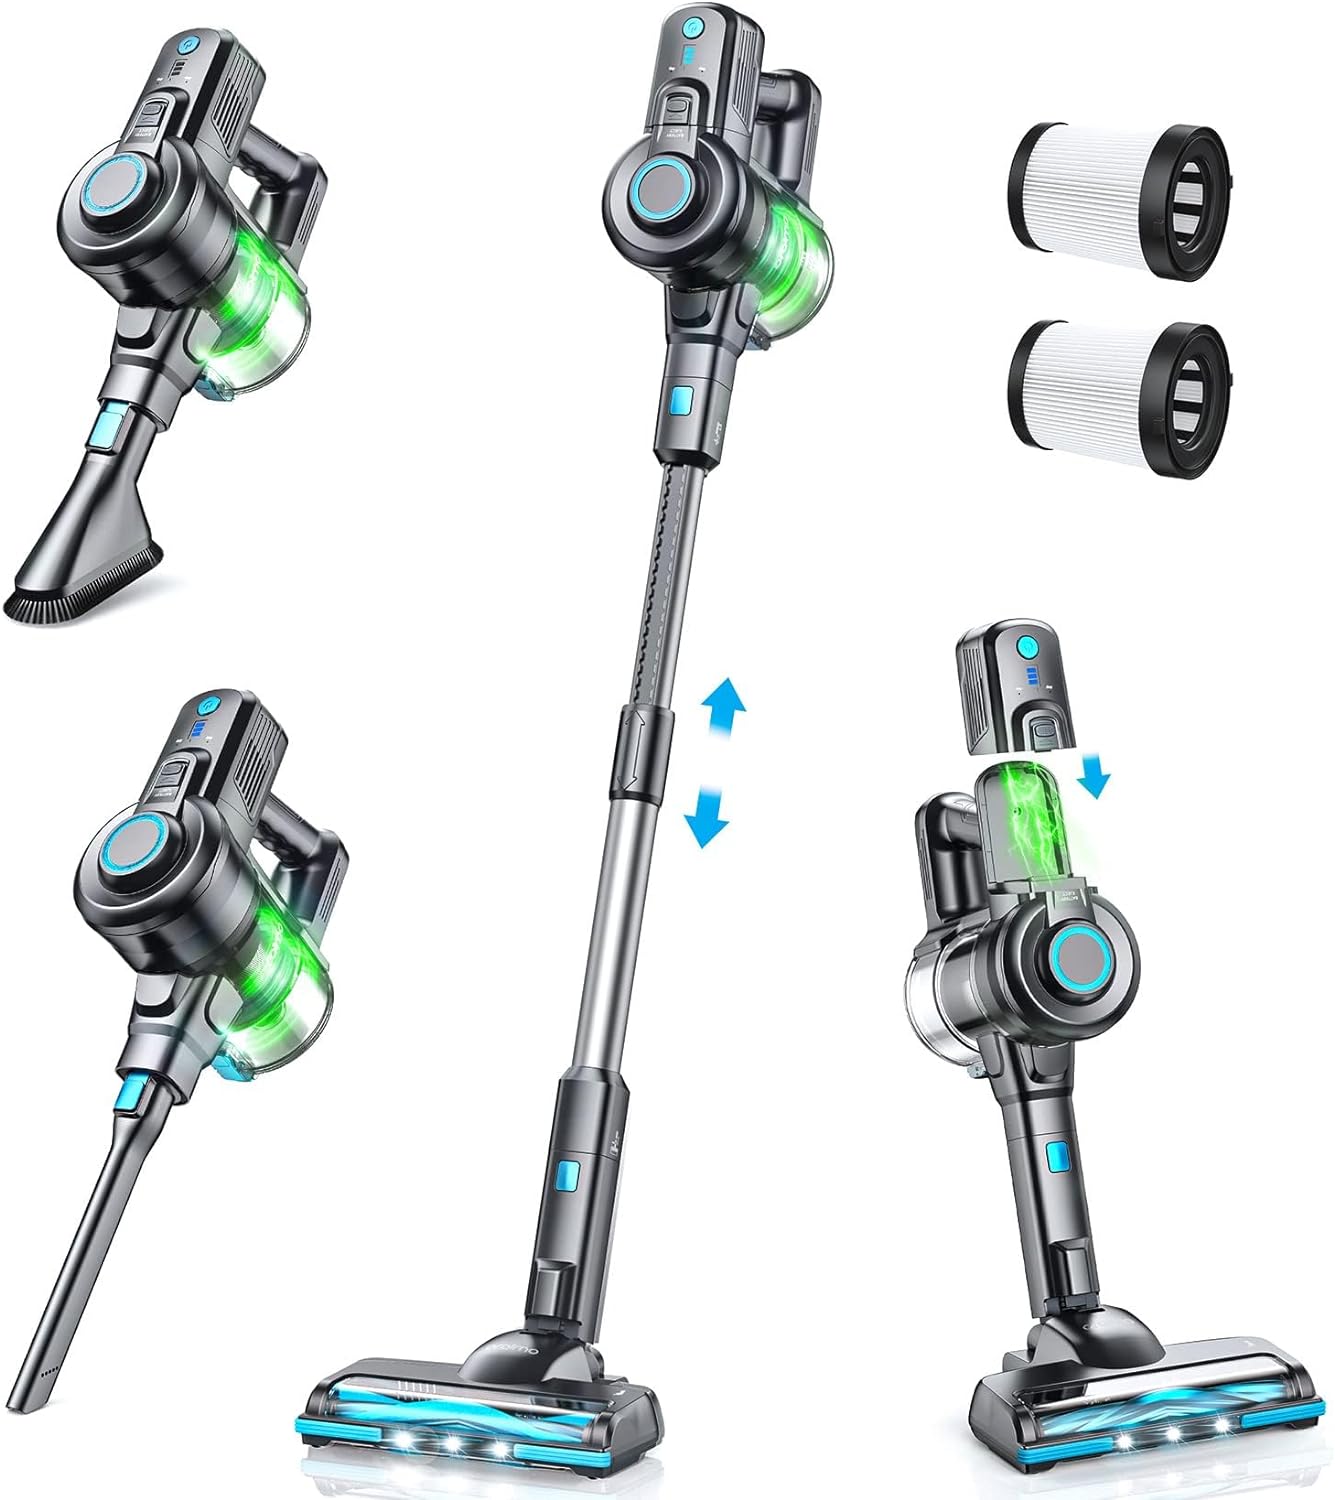 Oraimo Cordless Vacuum Cleaner Review: Efficient and Convenient 6-in-1